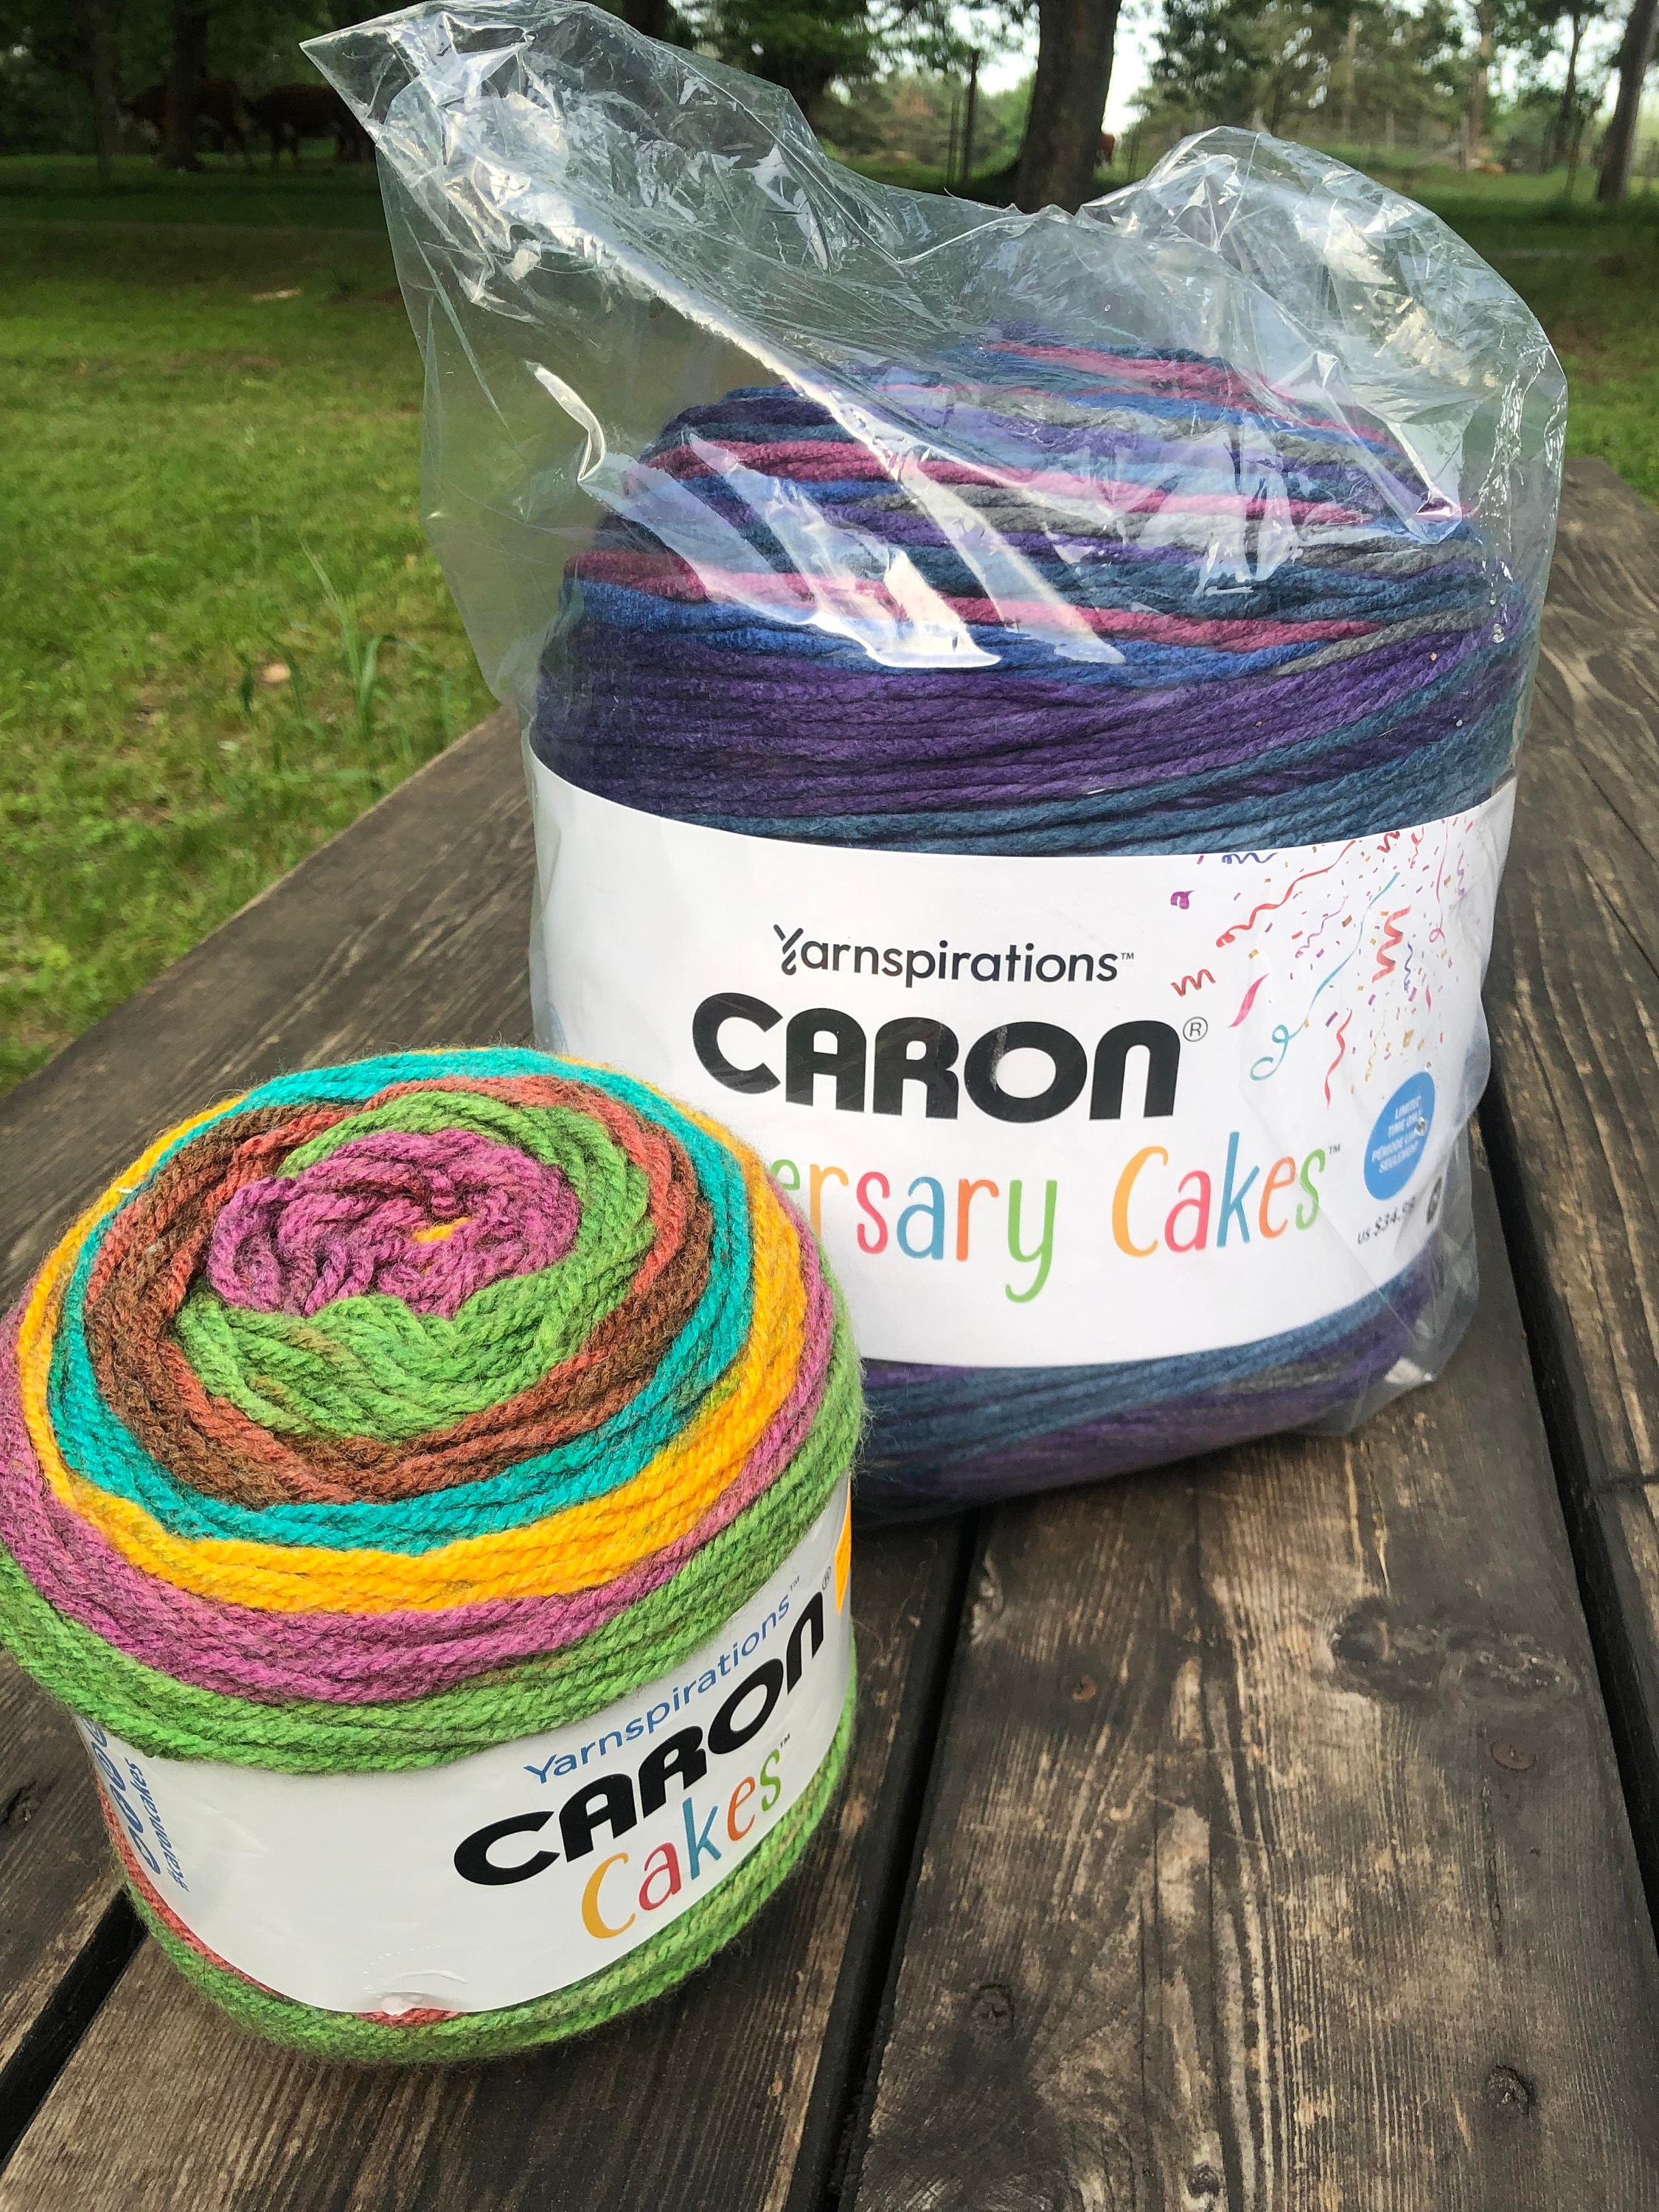 Does anyone know where I can get another Caron Anniversary